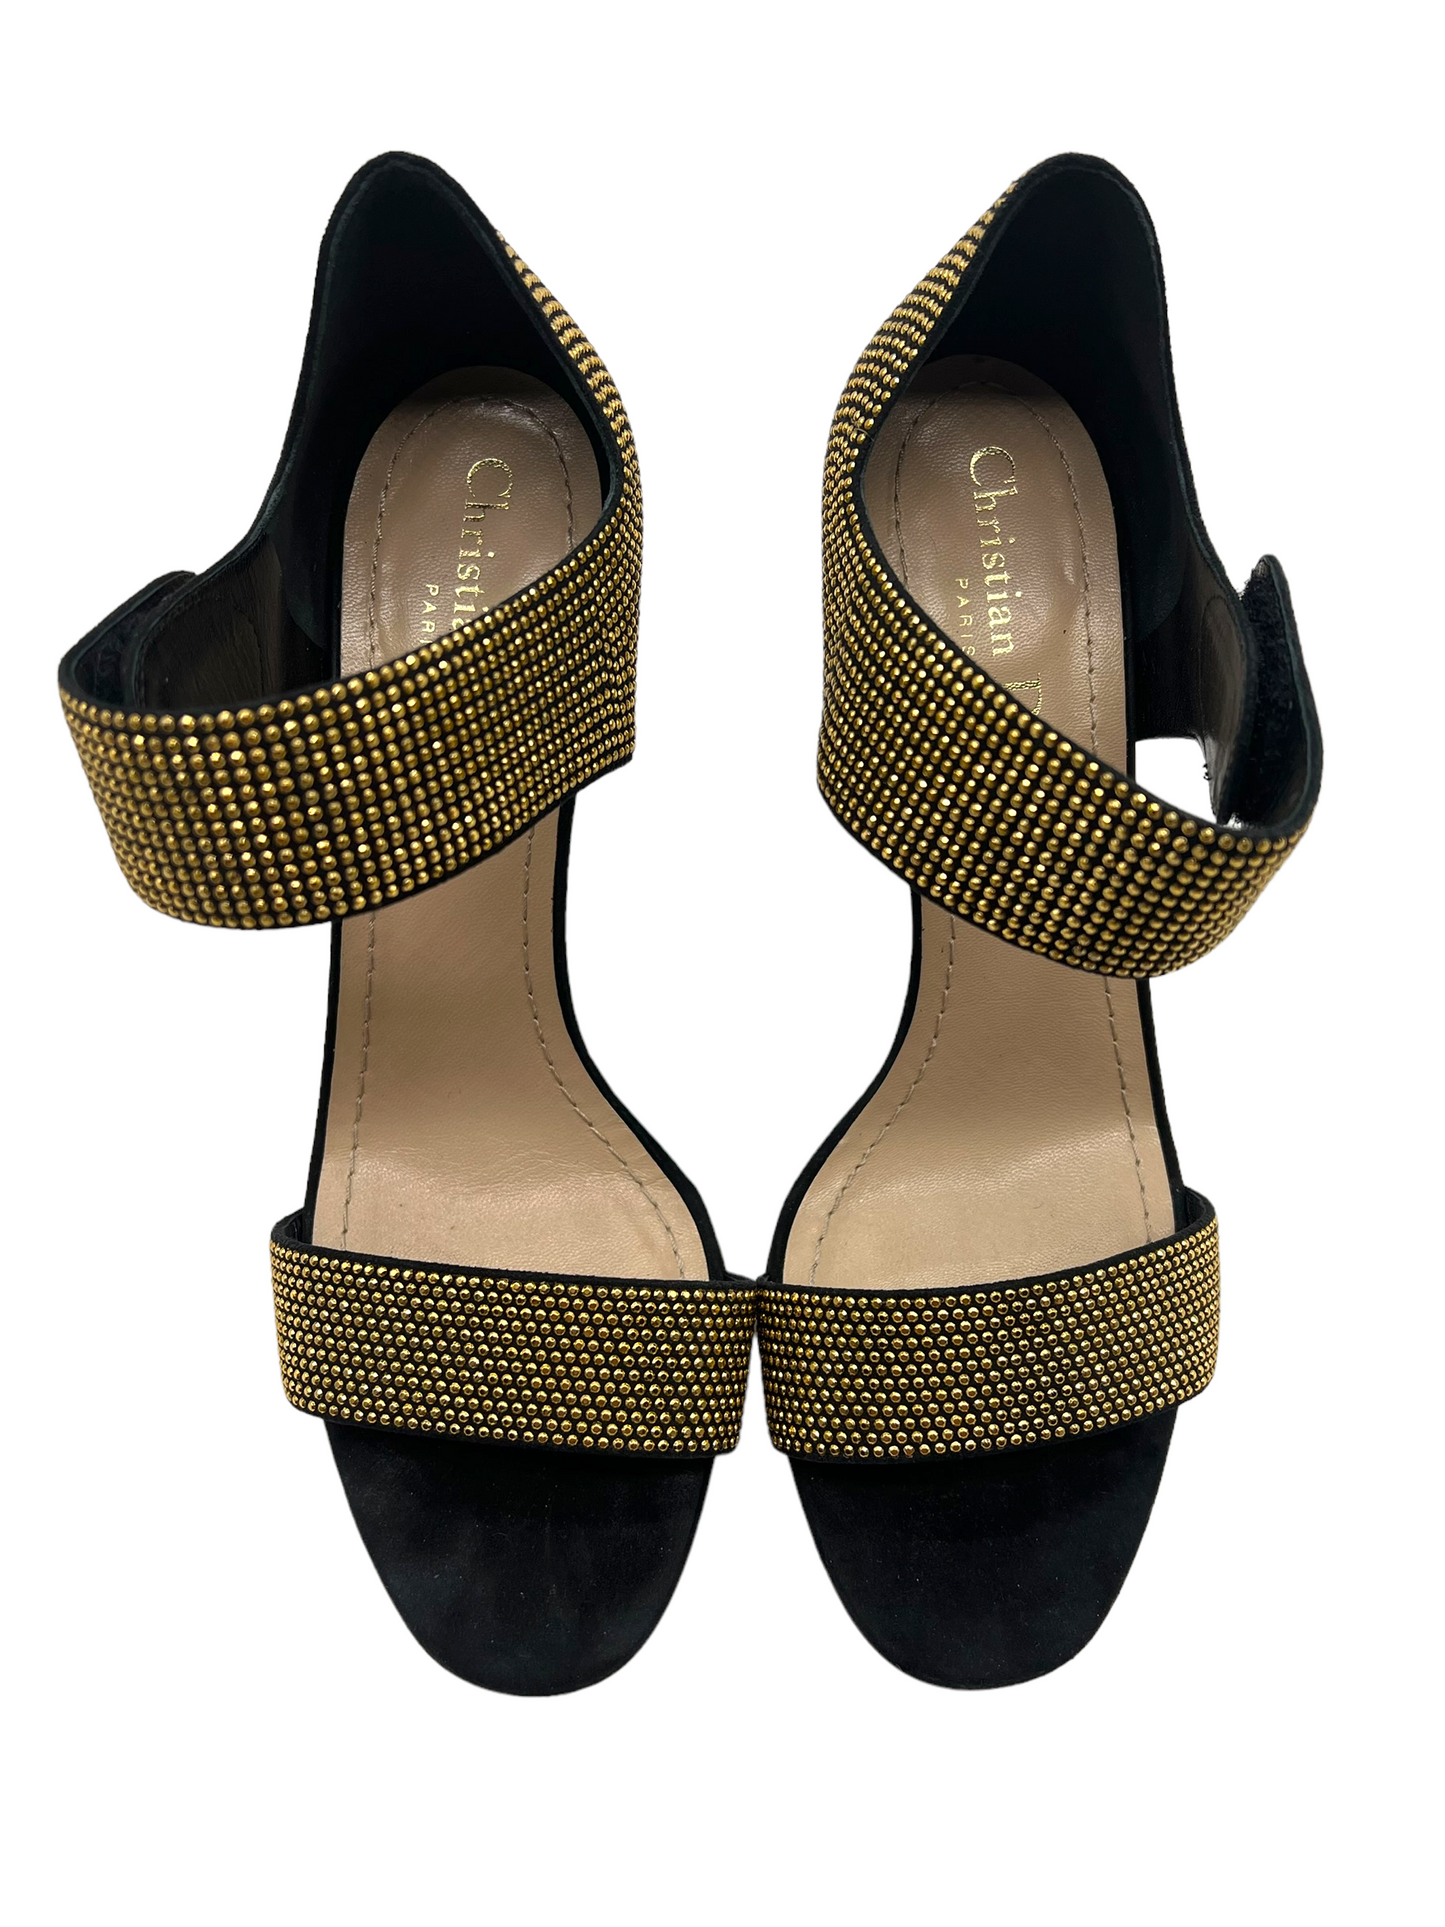 Dior Gold Studded Double Strap Size 38 Heels